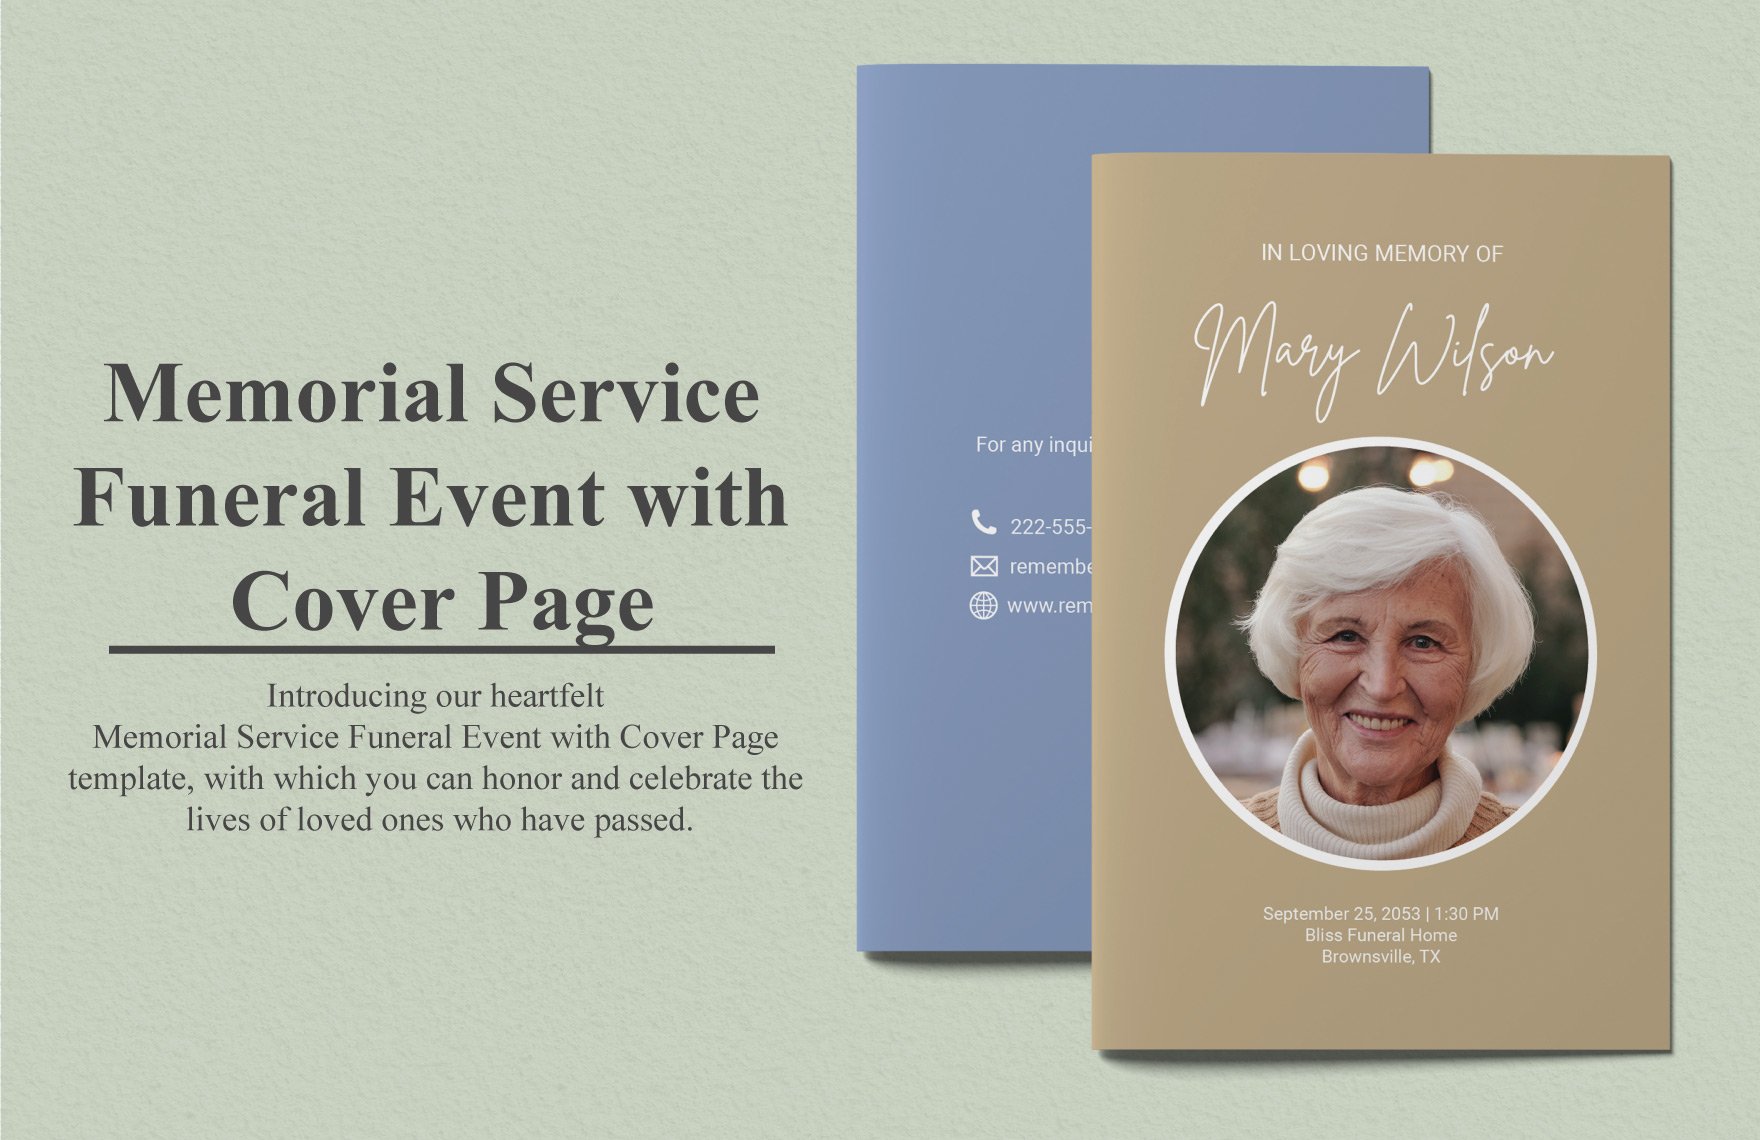 Memorial Service Funeral Event with Cover Page in Word, Illustrator, PSD